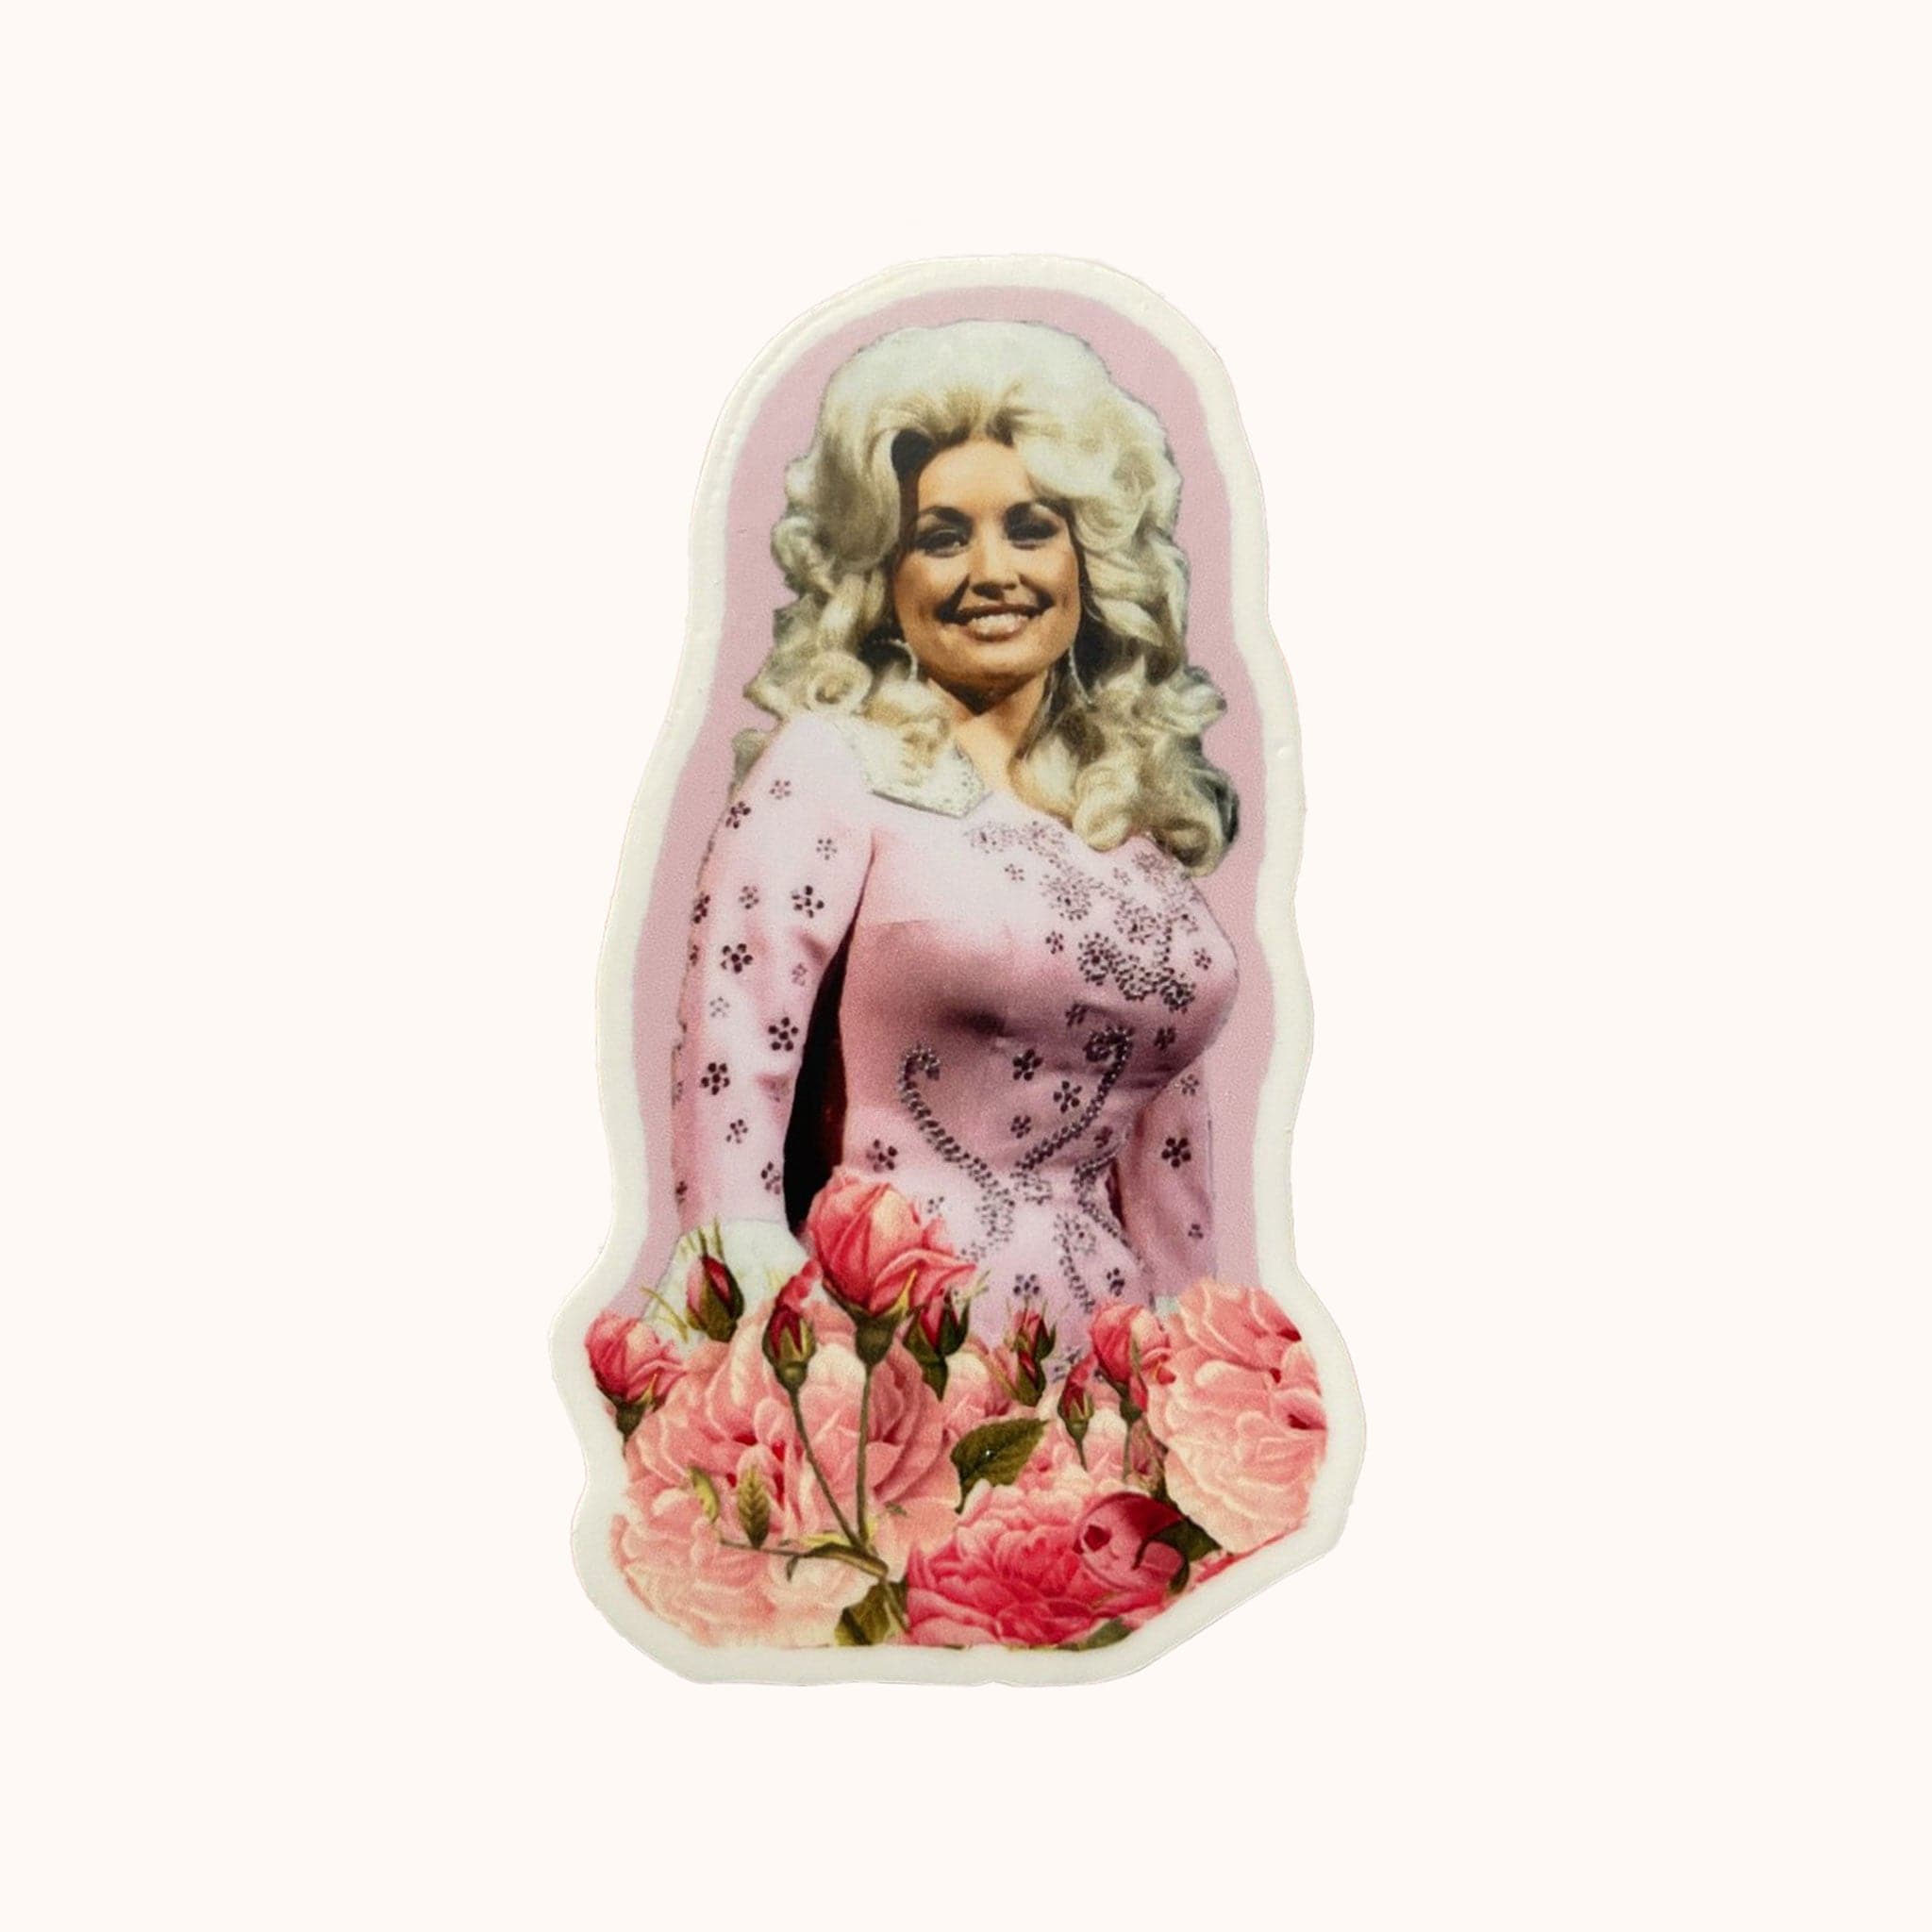 A pink cut out sticker of Dolly Parton in a pink outfit with her iconic voluminous hair and pink roses on the bottom.